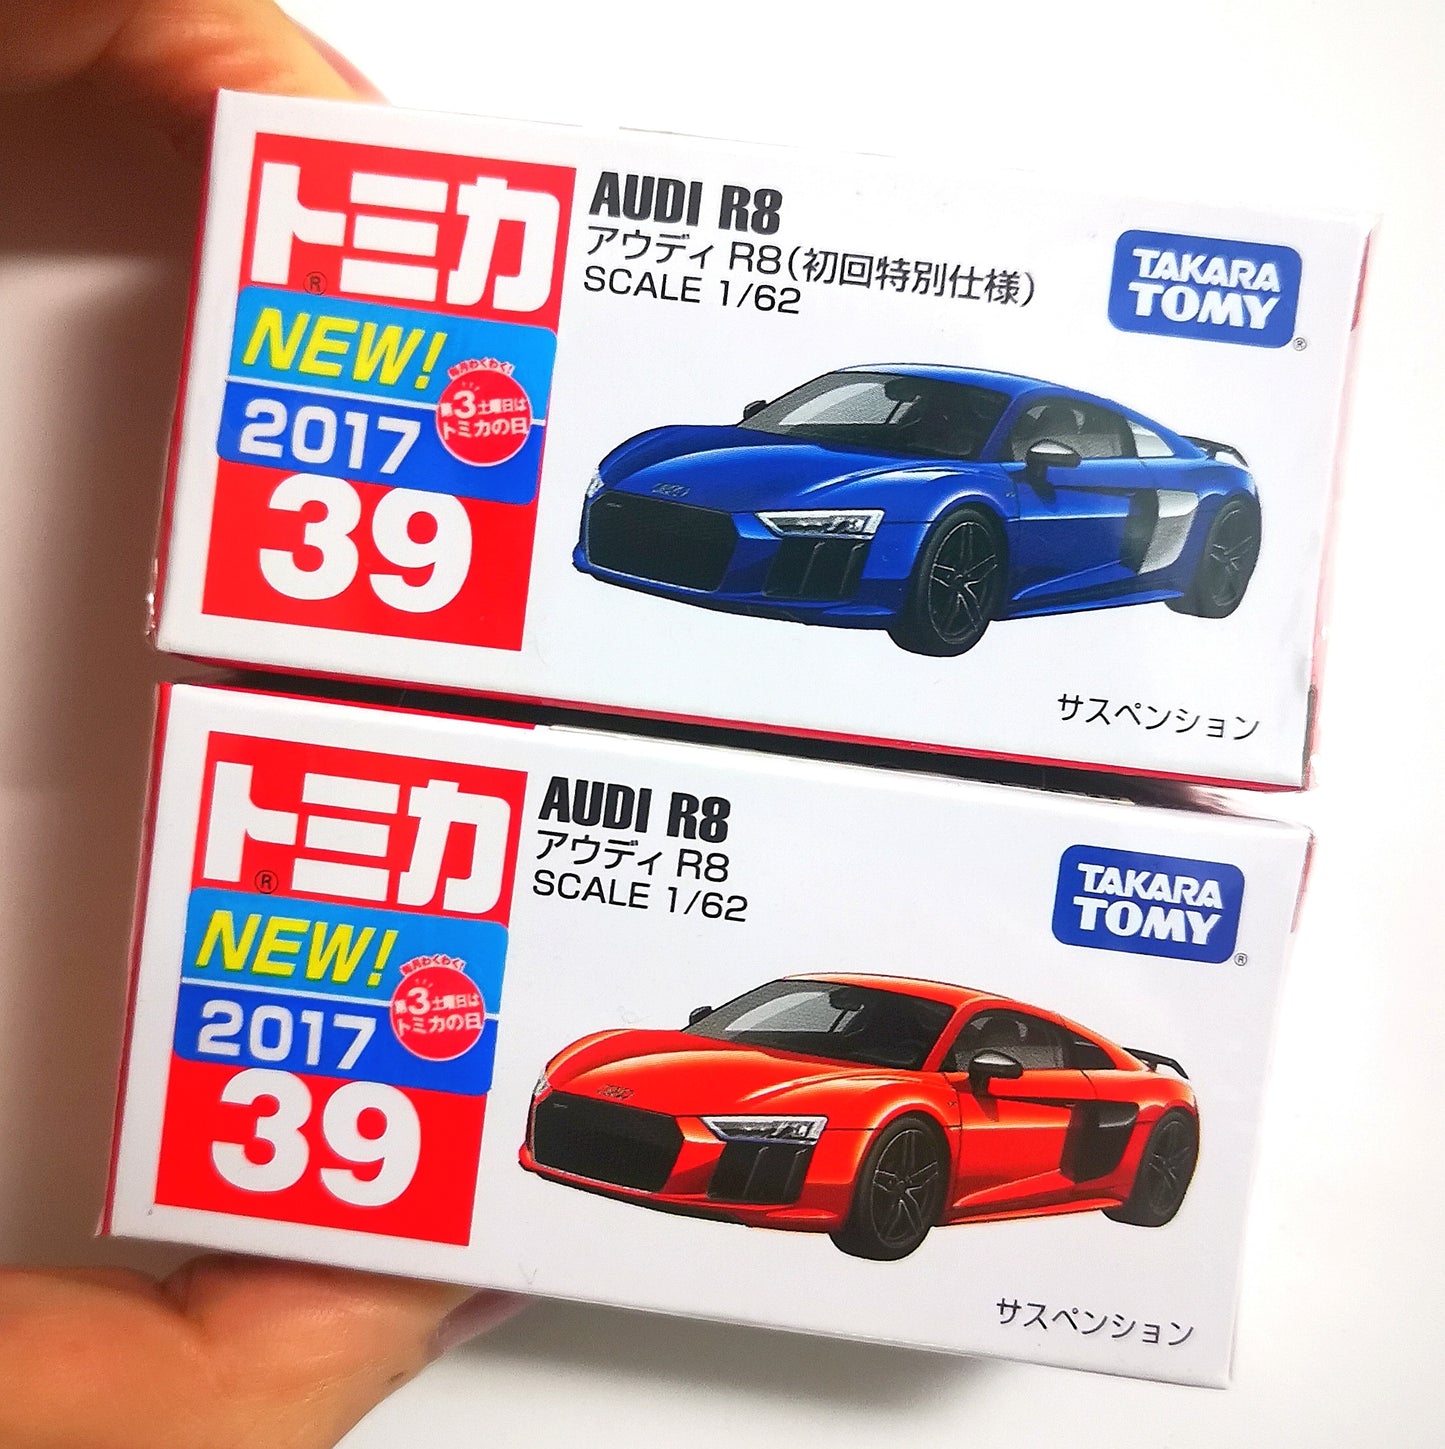 Tomica #39 Audi R8 Set Of Two